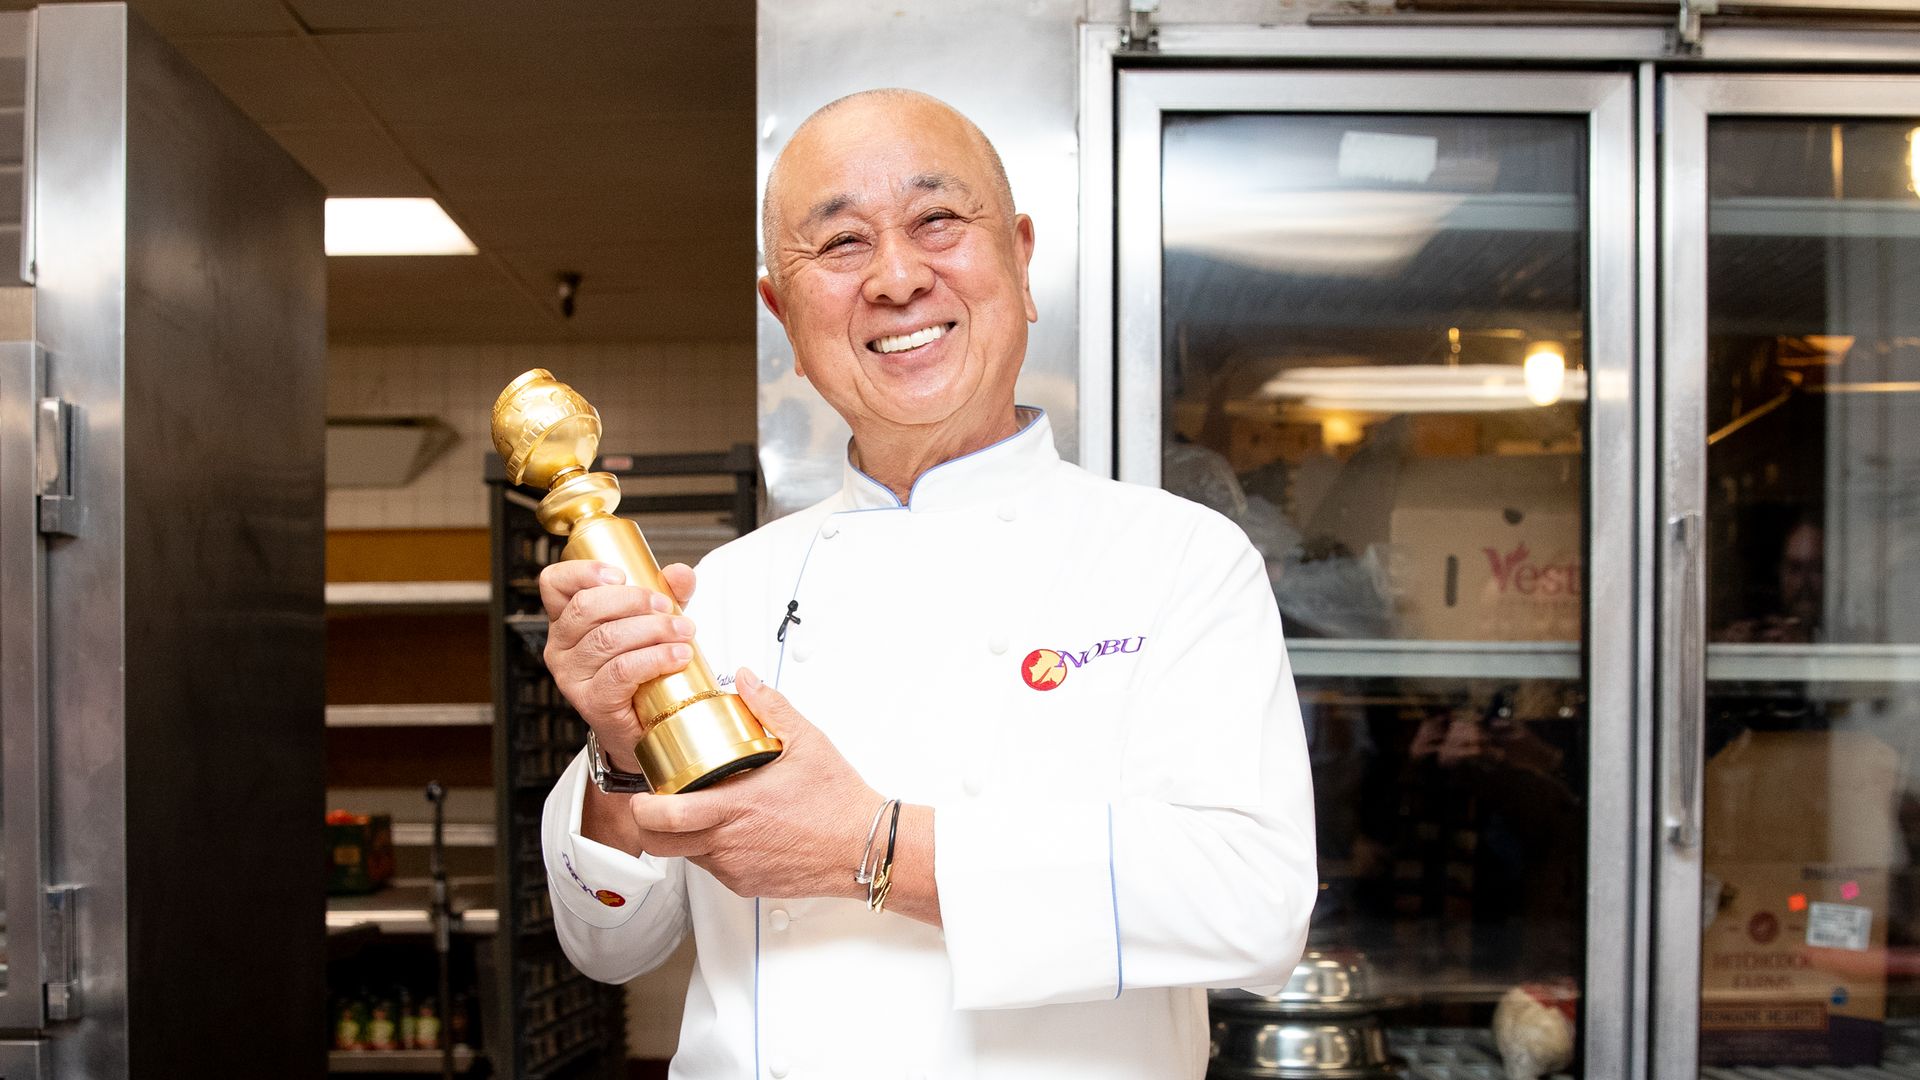 Chef Nobu Matsuhisa at the Golden Globe Awards Plate Up Preview held at the Beverly Hilton Hotel